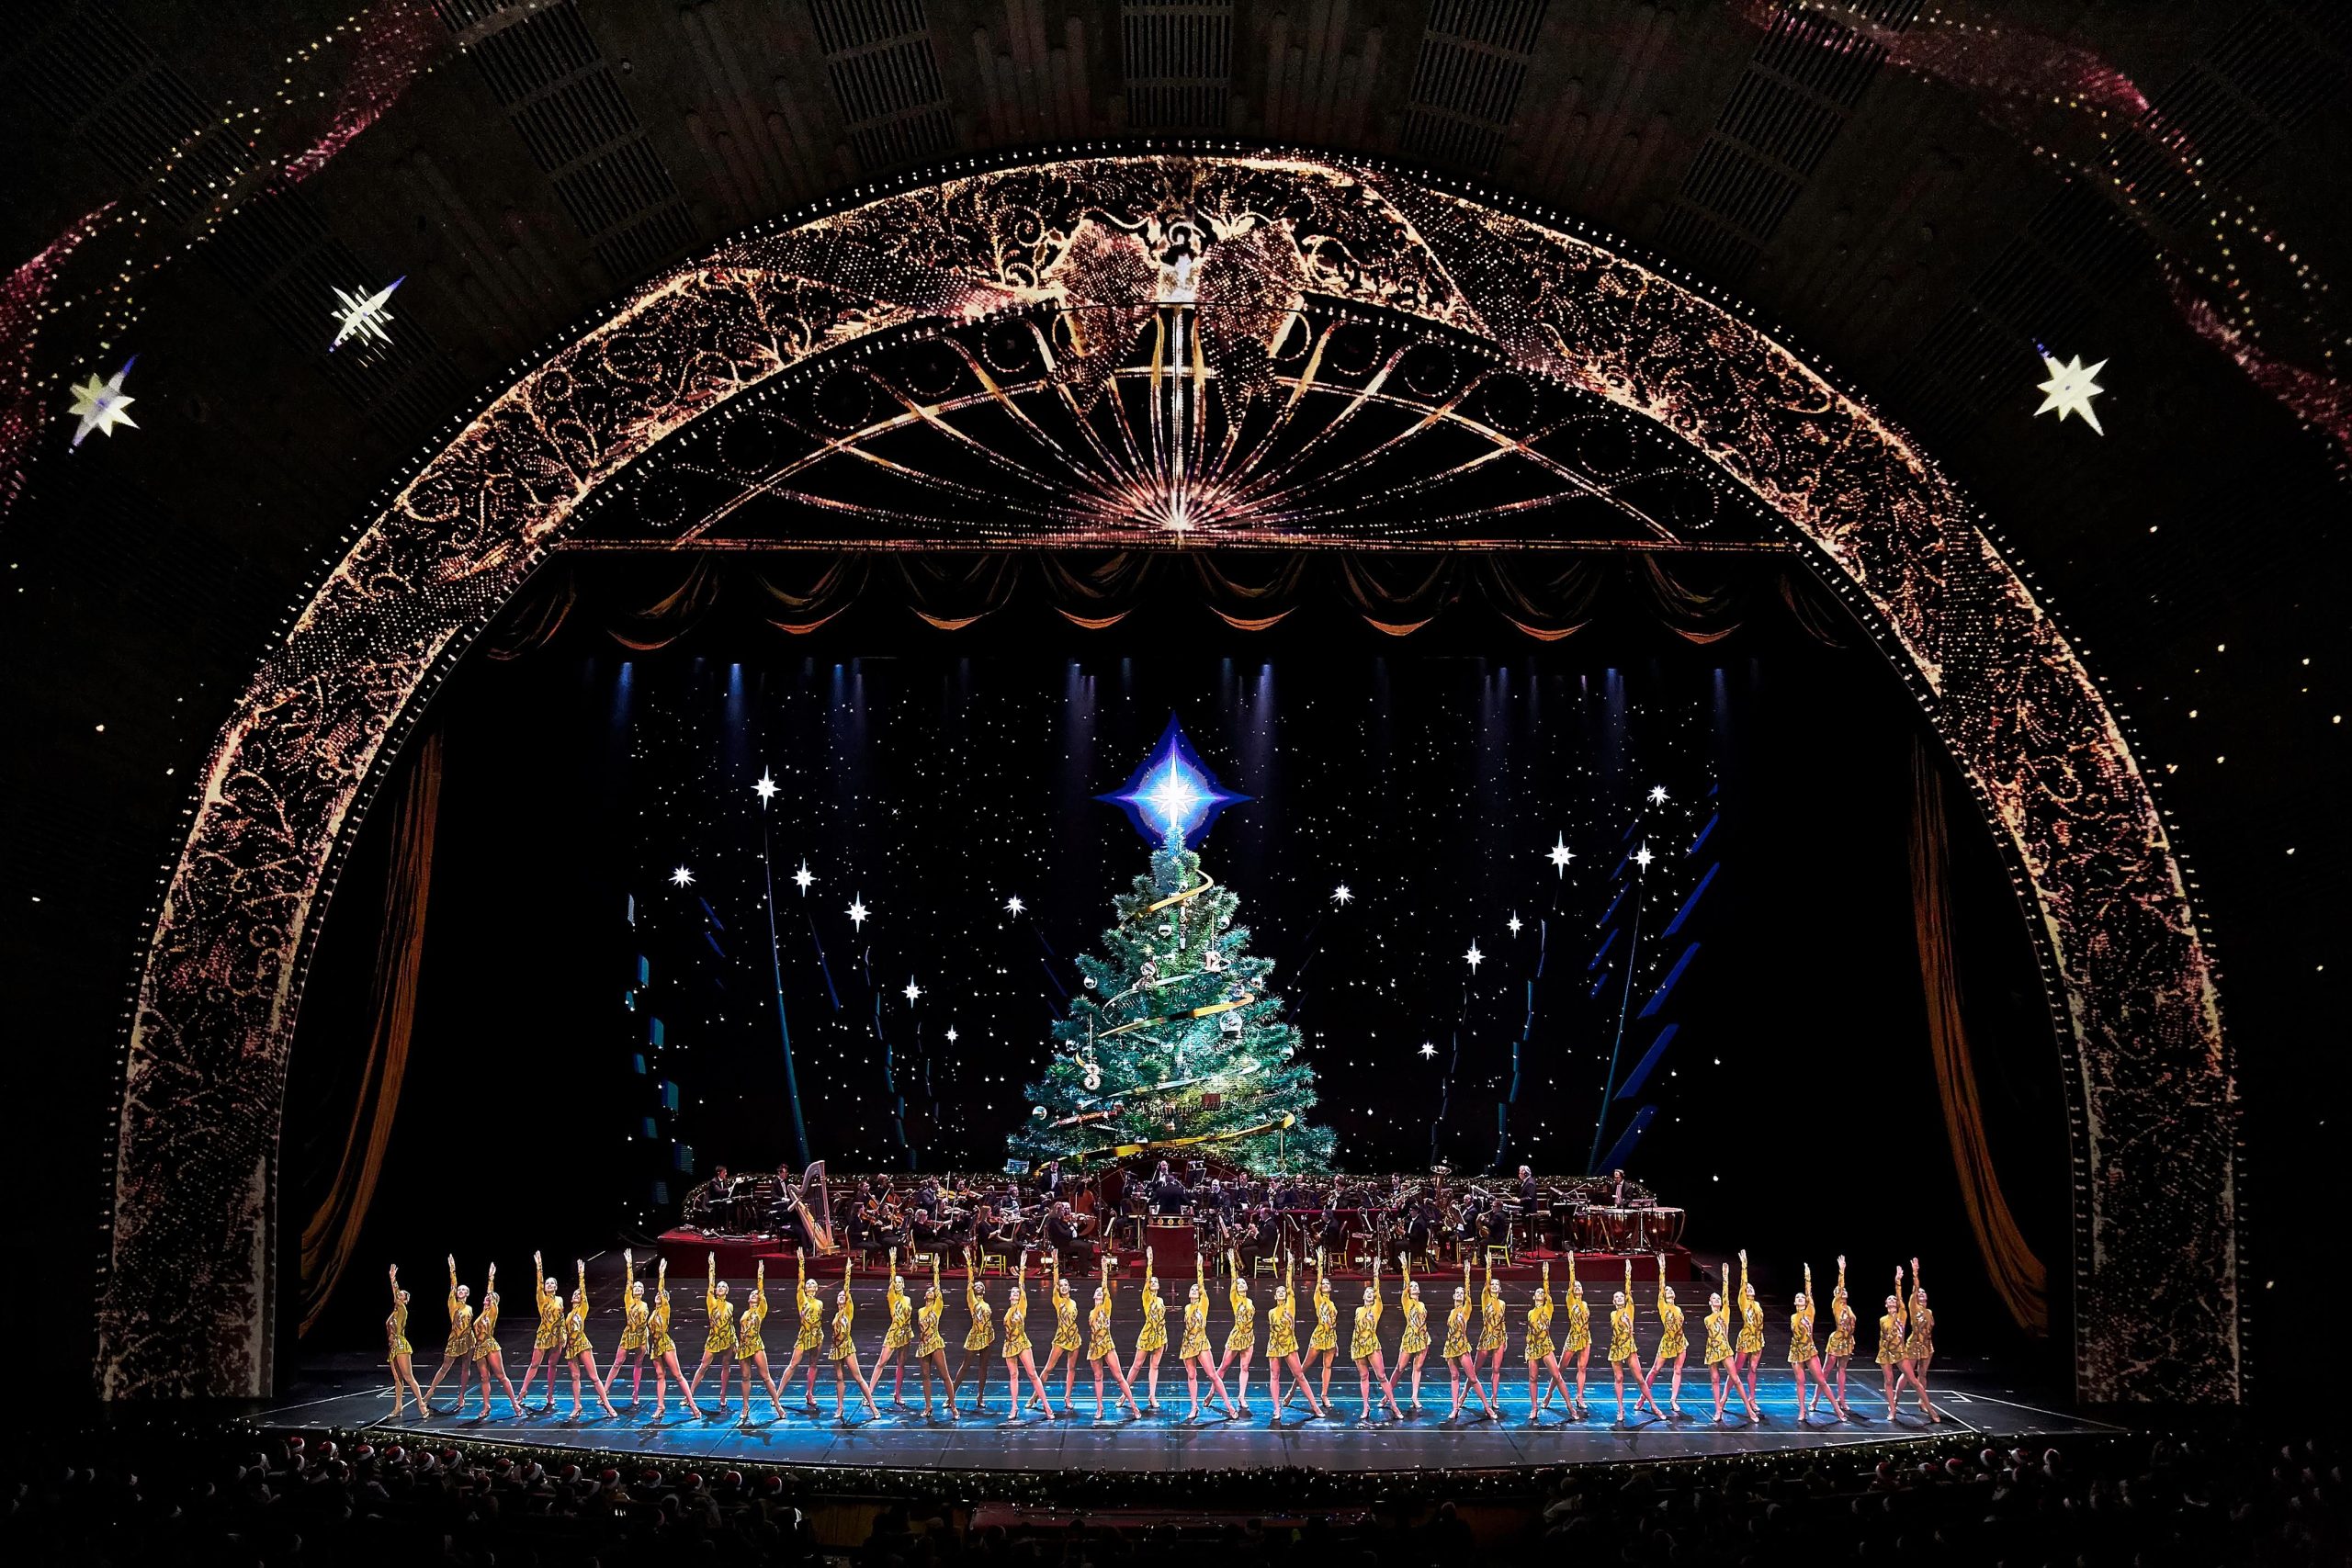 The Christmas Spectacular combines classic holiday music and showstopping choreography with technological elements that extend the show beyond the stage to transport audiences from their seats right to the center of the action. Photo courtesy of Madison Square Garden